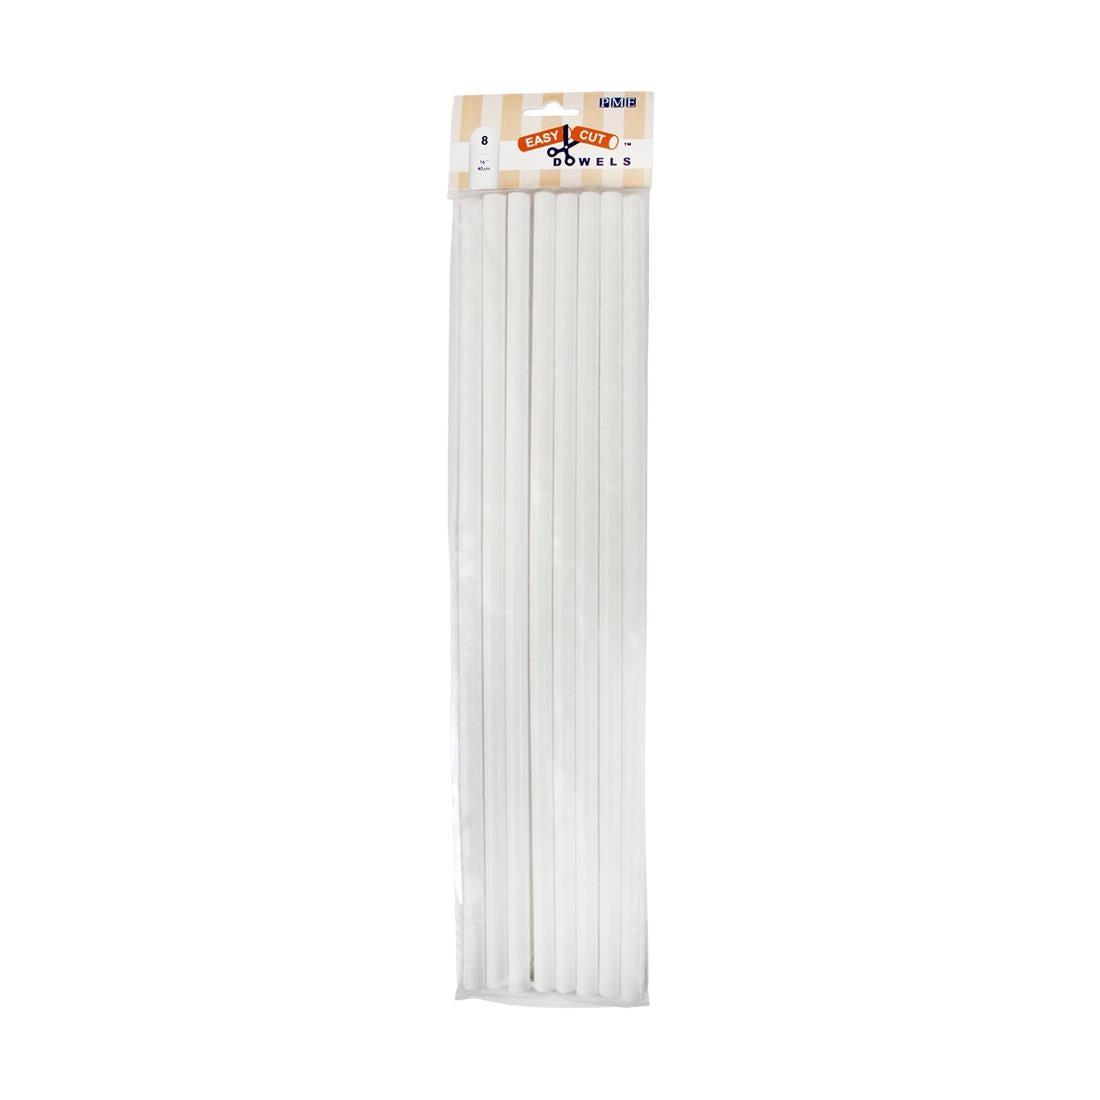 CX144 PME Dowel Rods Easy Cut 400mm Pack of 8 JD Catering Equipment Solutions Ltd